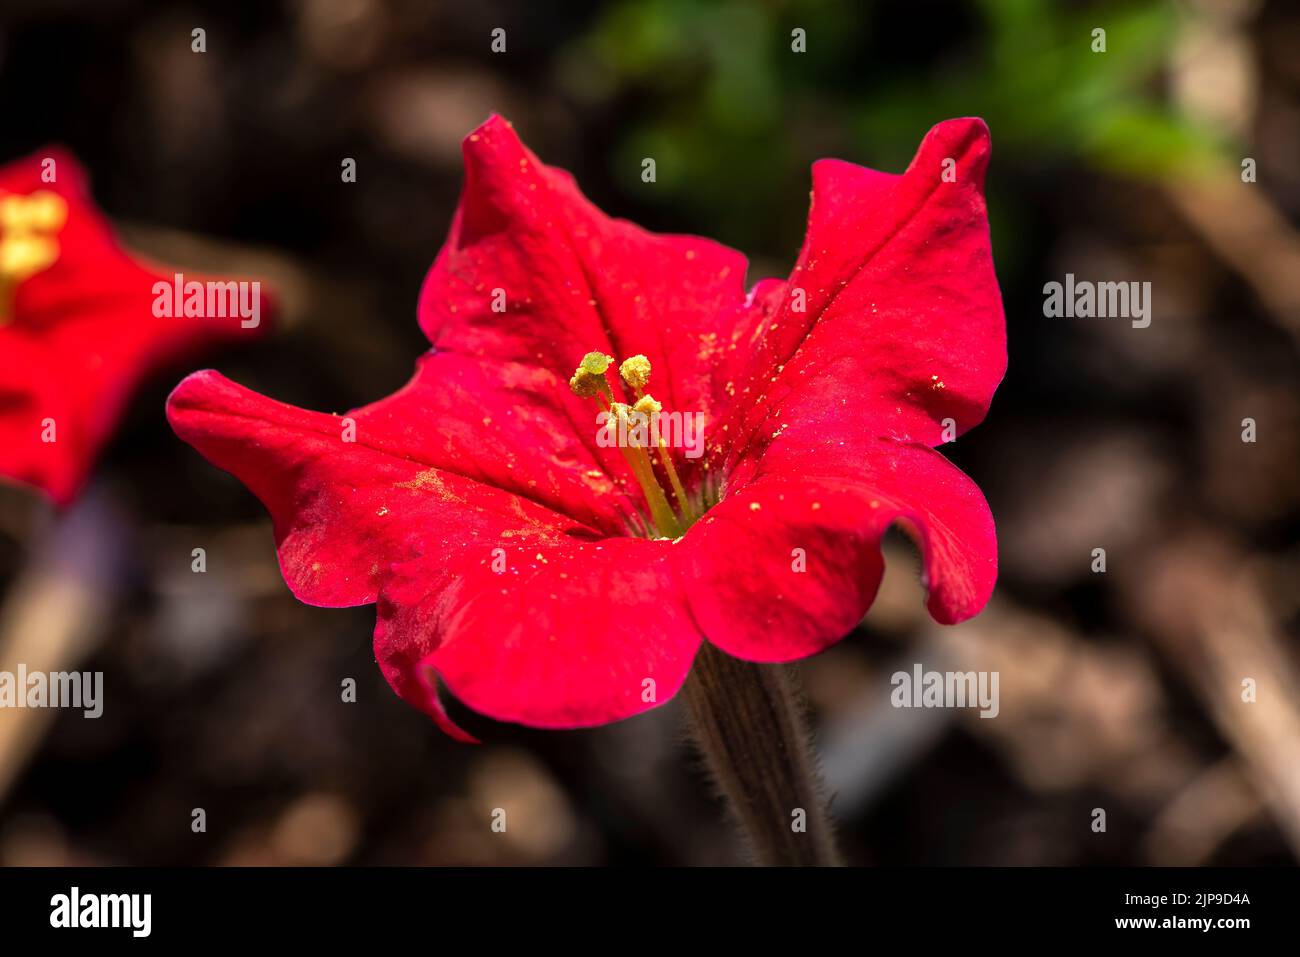 Petunia exserta is a rare summer flowering plant with a red summertime flower which is native to Brazil, stock photo image Stock Photo